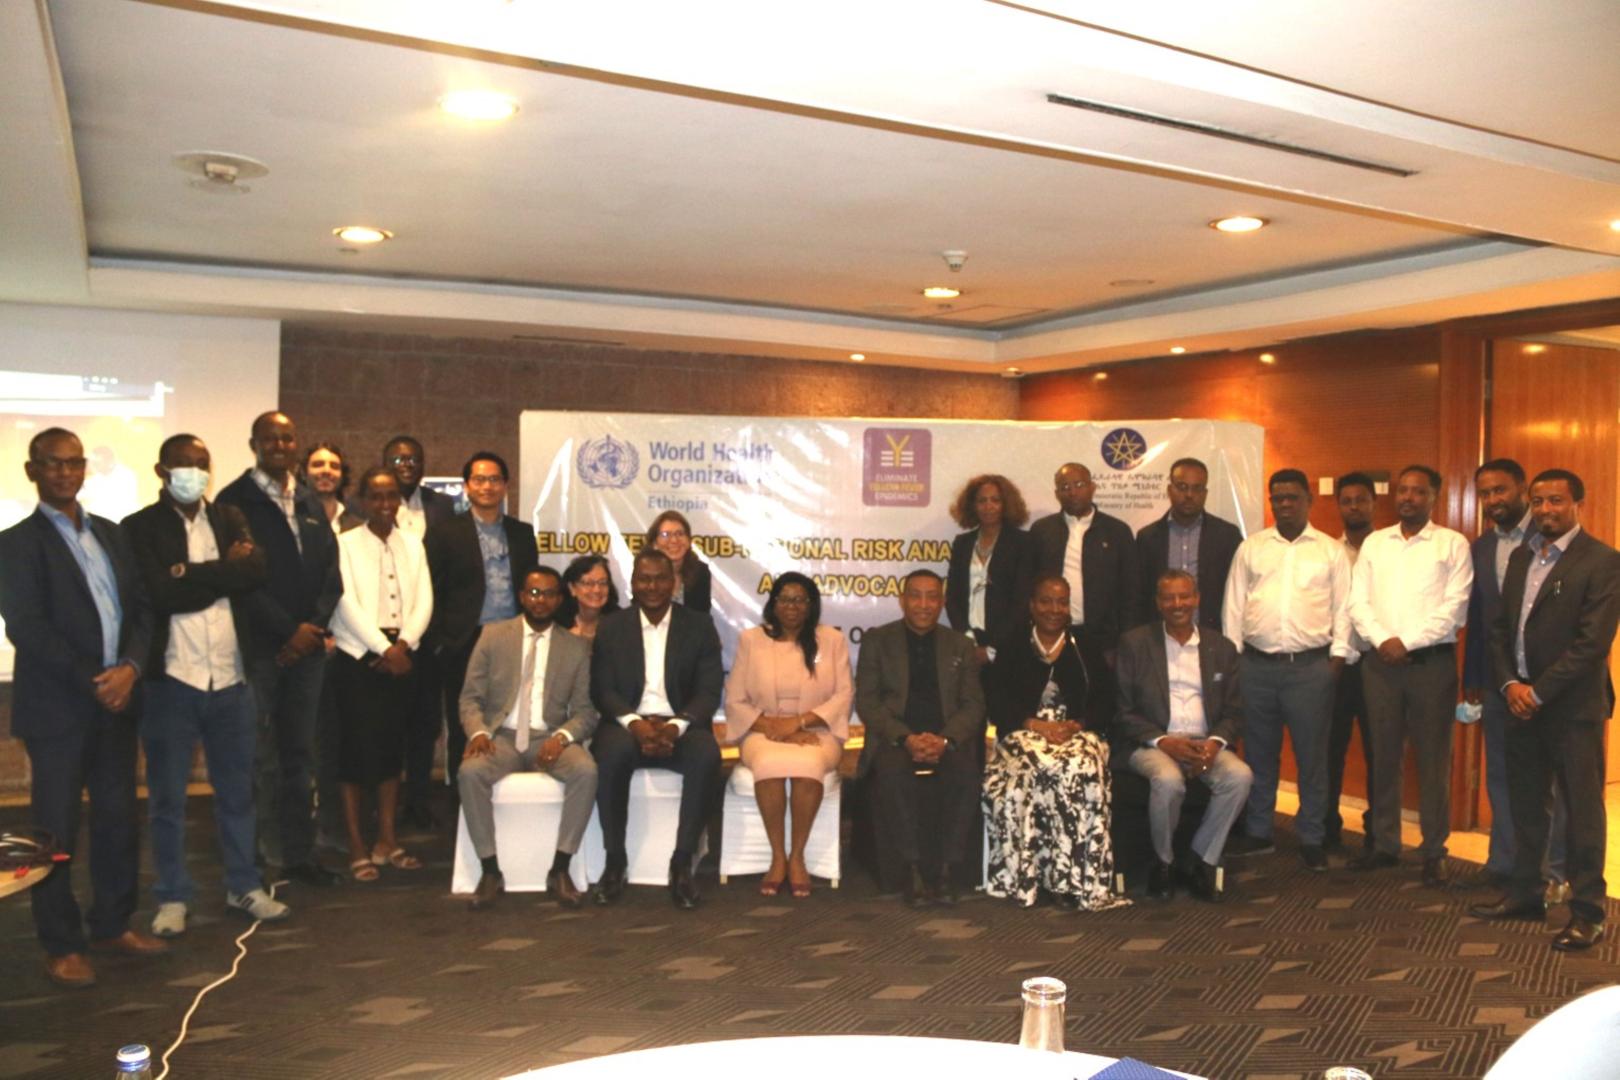 The Yellow Fever Sub-National Risk Analysis Finding Conveys the relative risks of regions in Ethiopia: WHO organizes the dissemination workshop